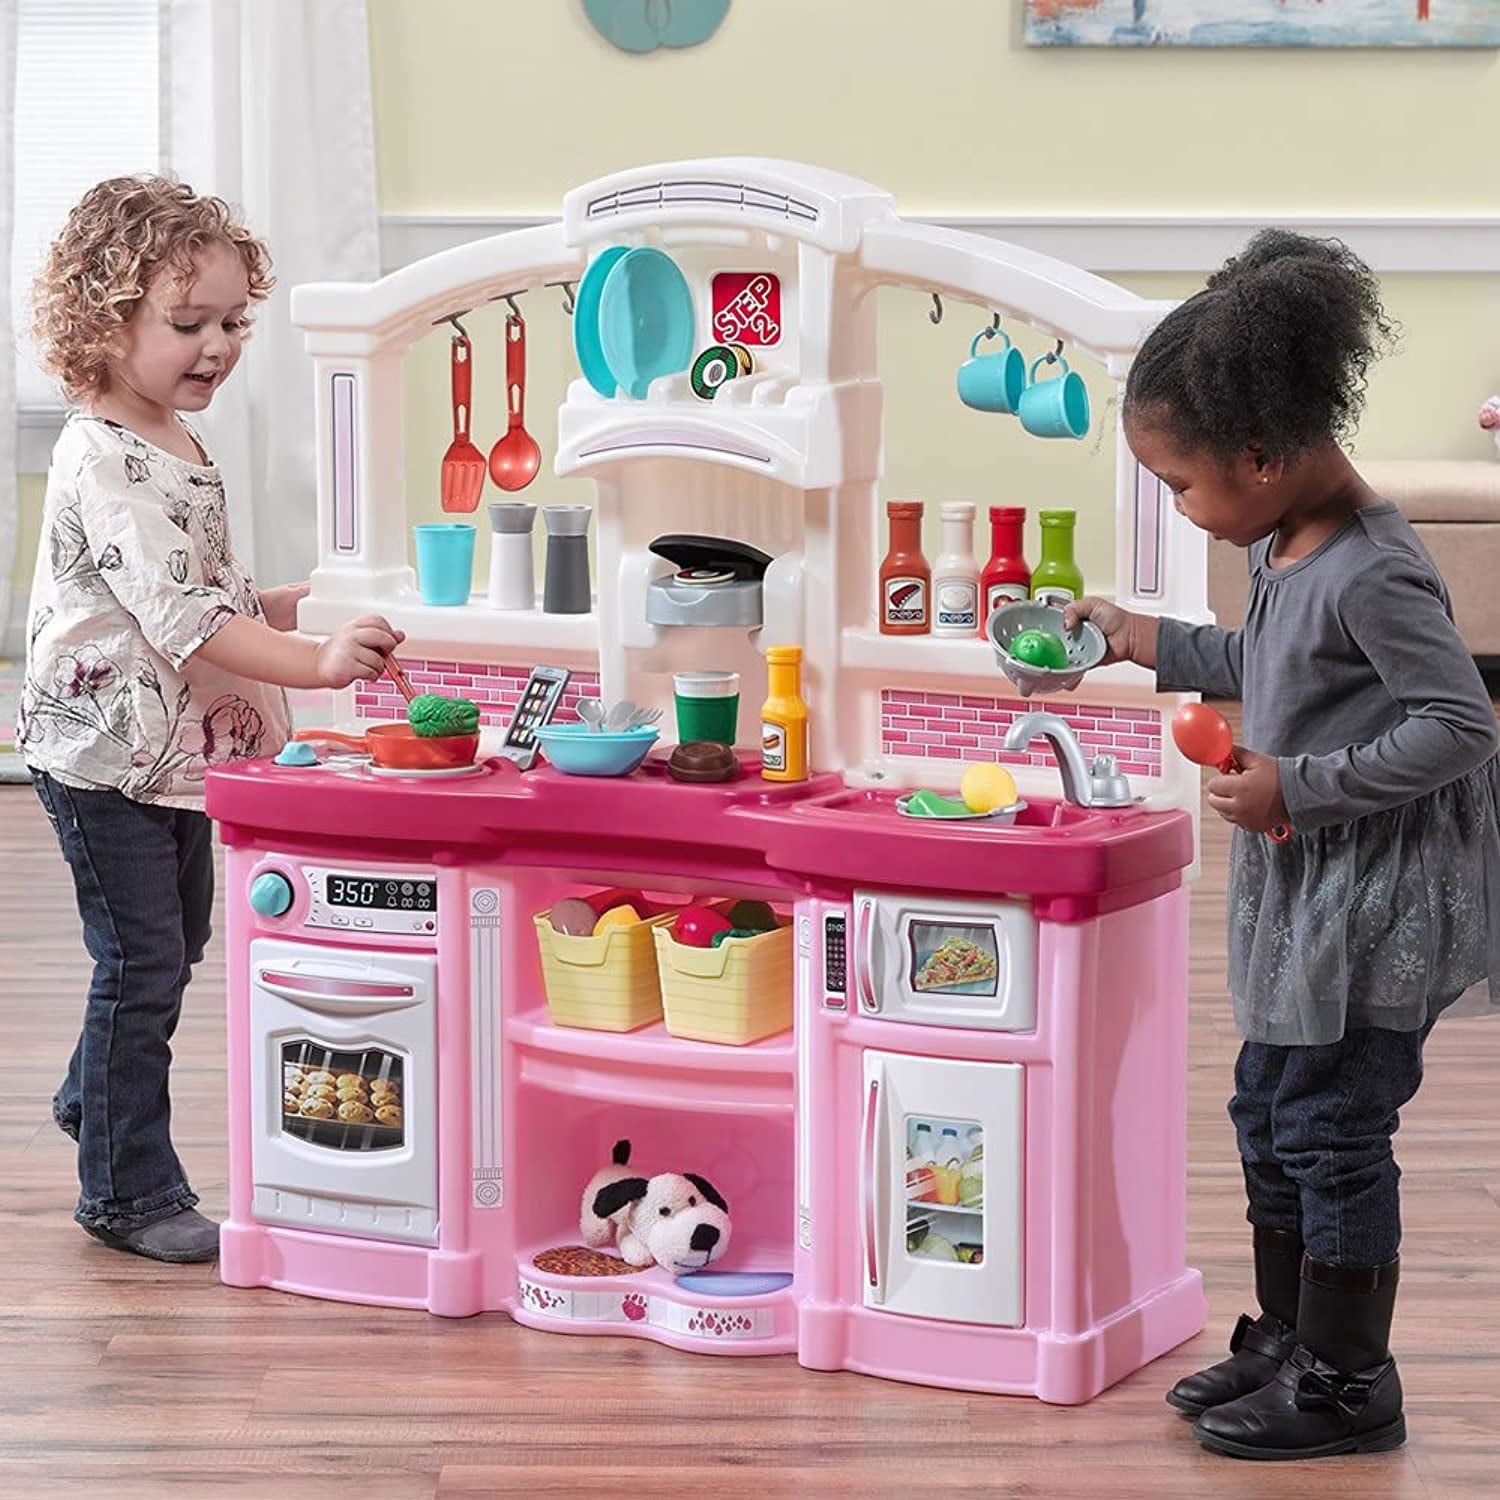 Step2 825199 Kitchen Play Set for sale online 